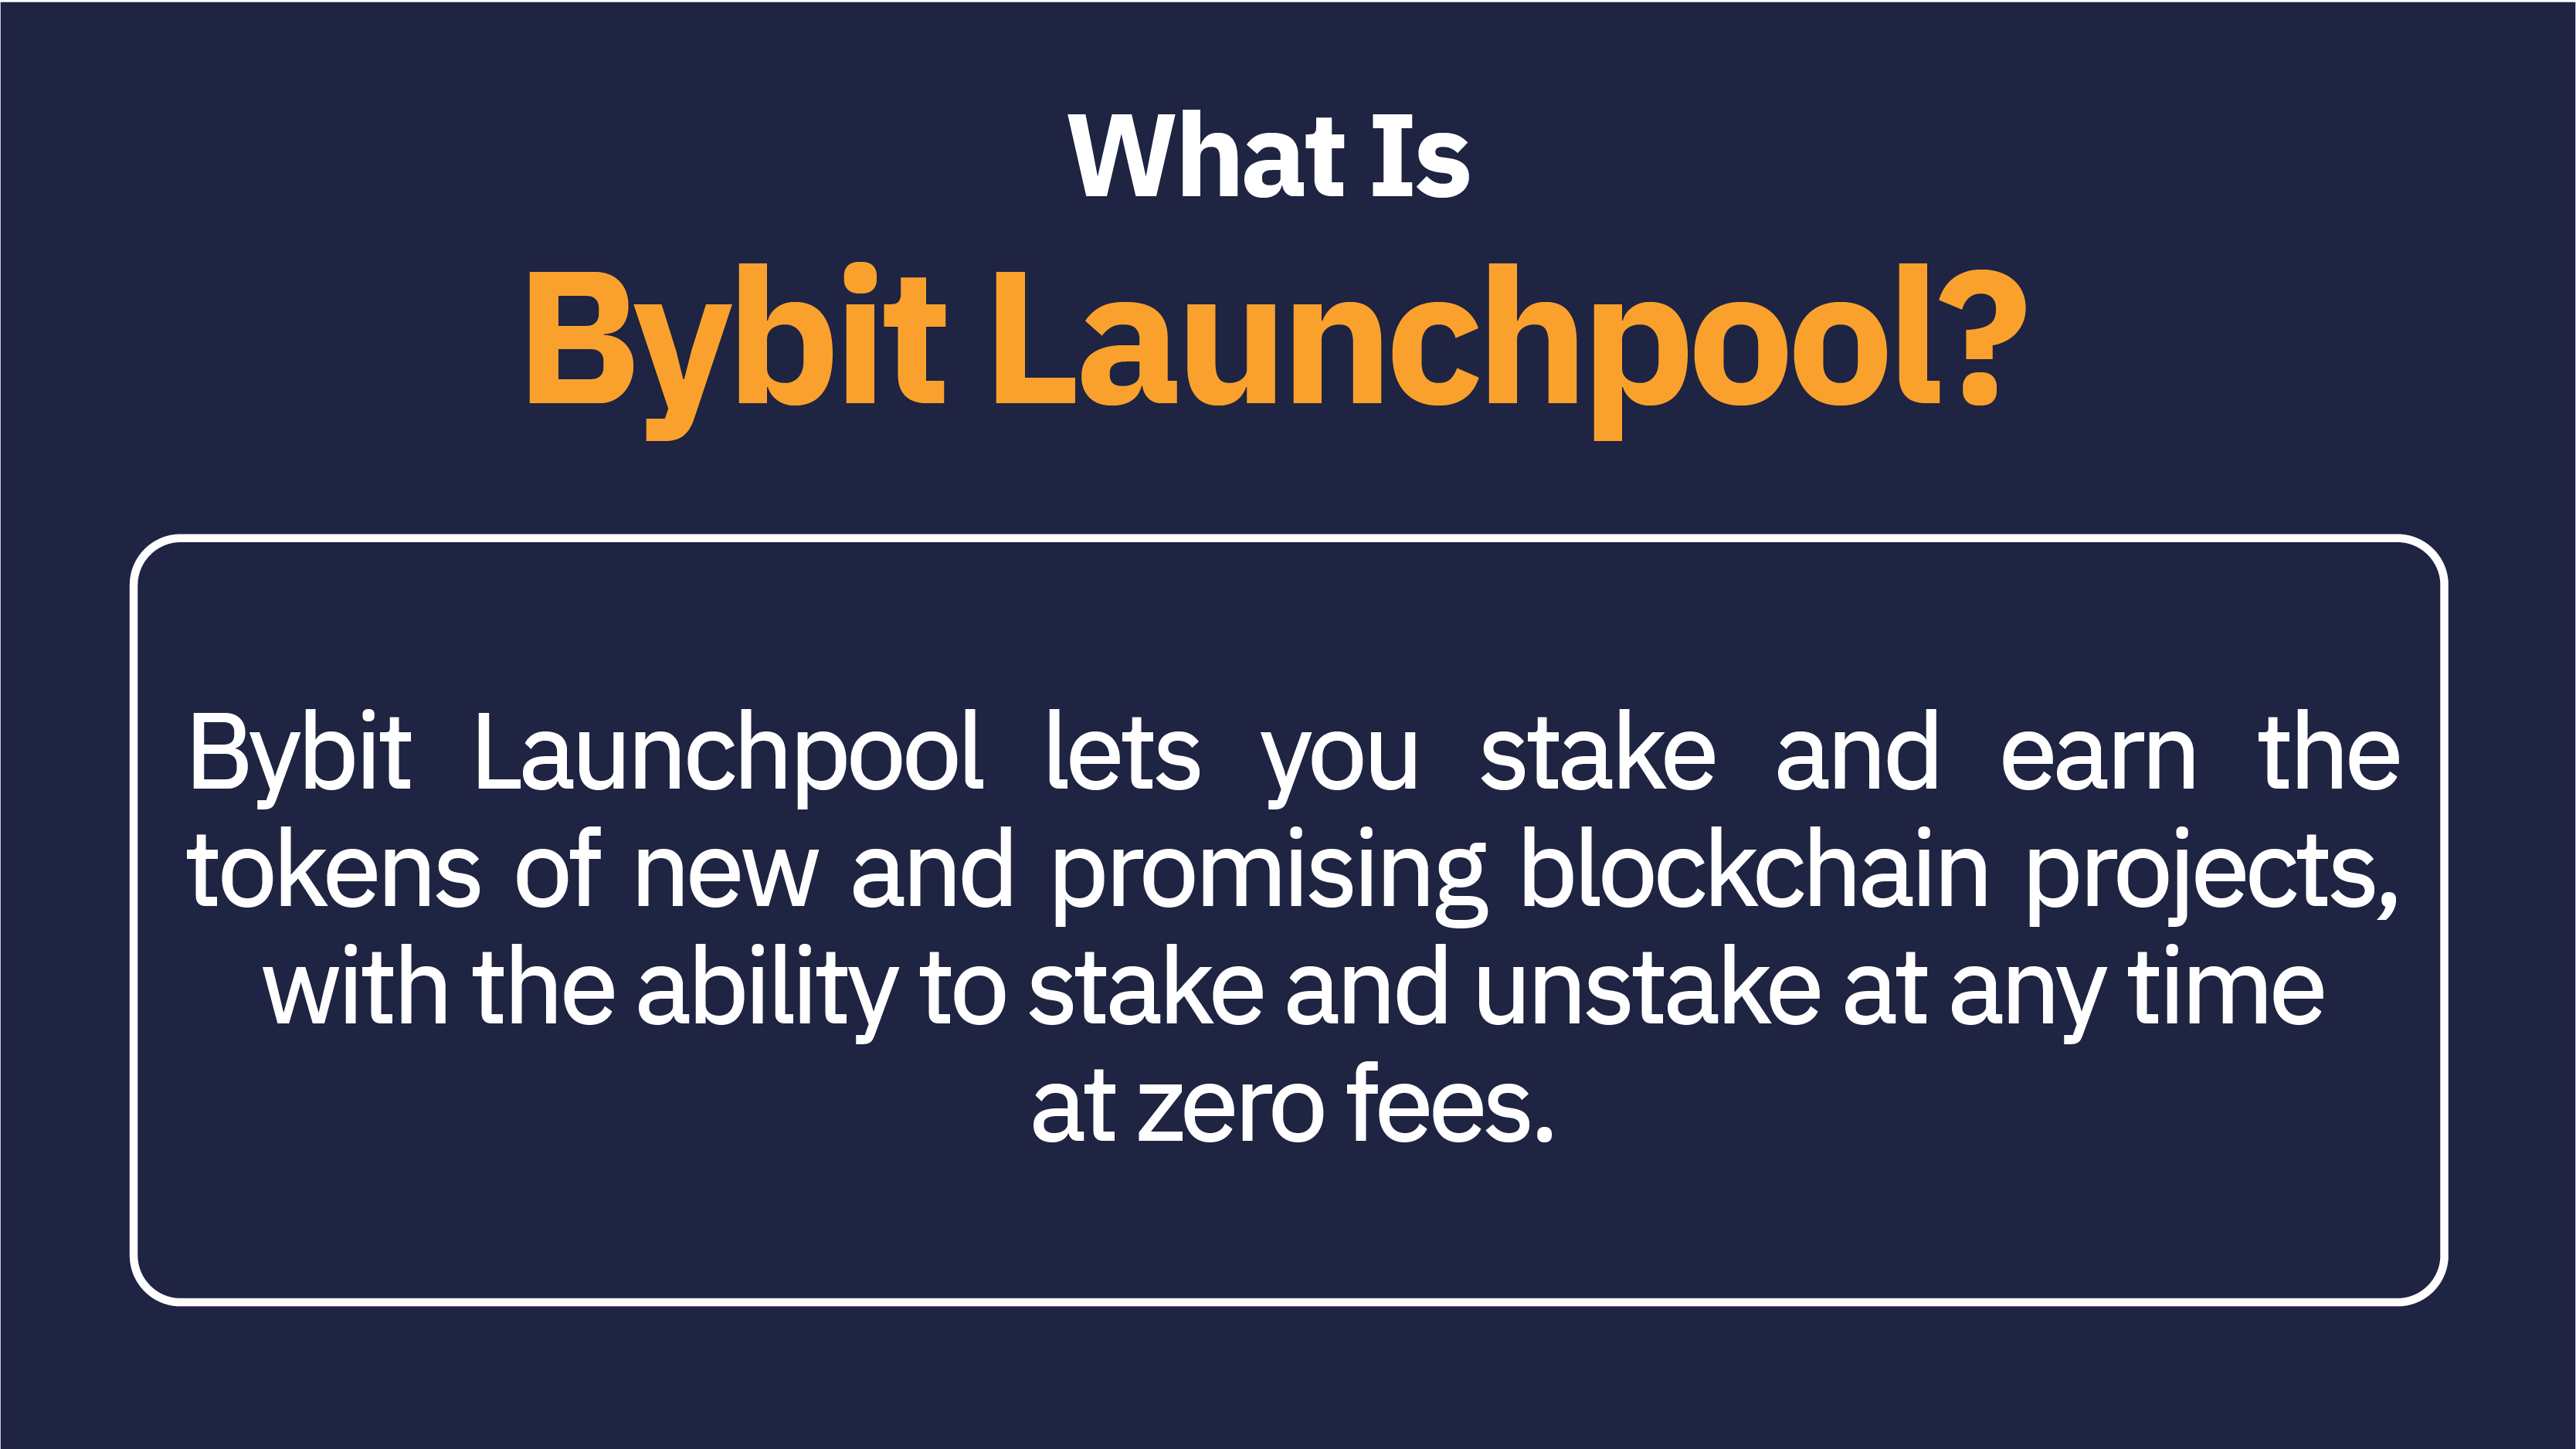 Bybit Launchpool lets you stake and earn the tokens of new and promising blockchain projects, with the ability to stake and unstake at any time at zero fees.